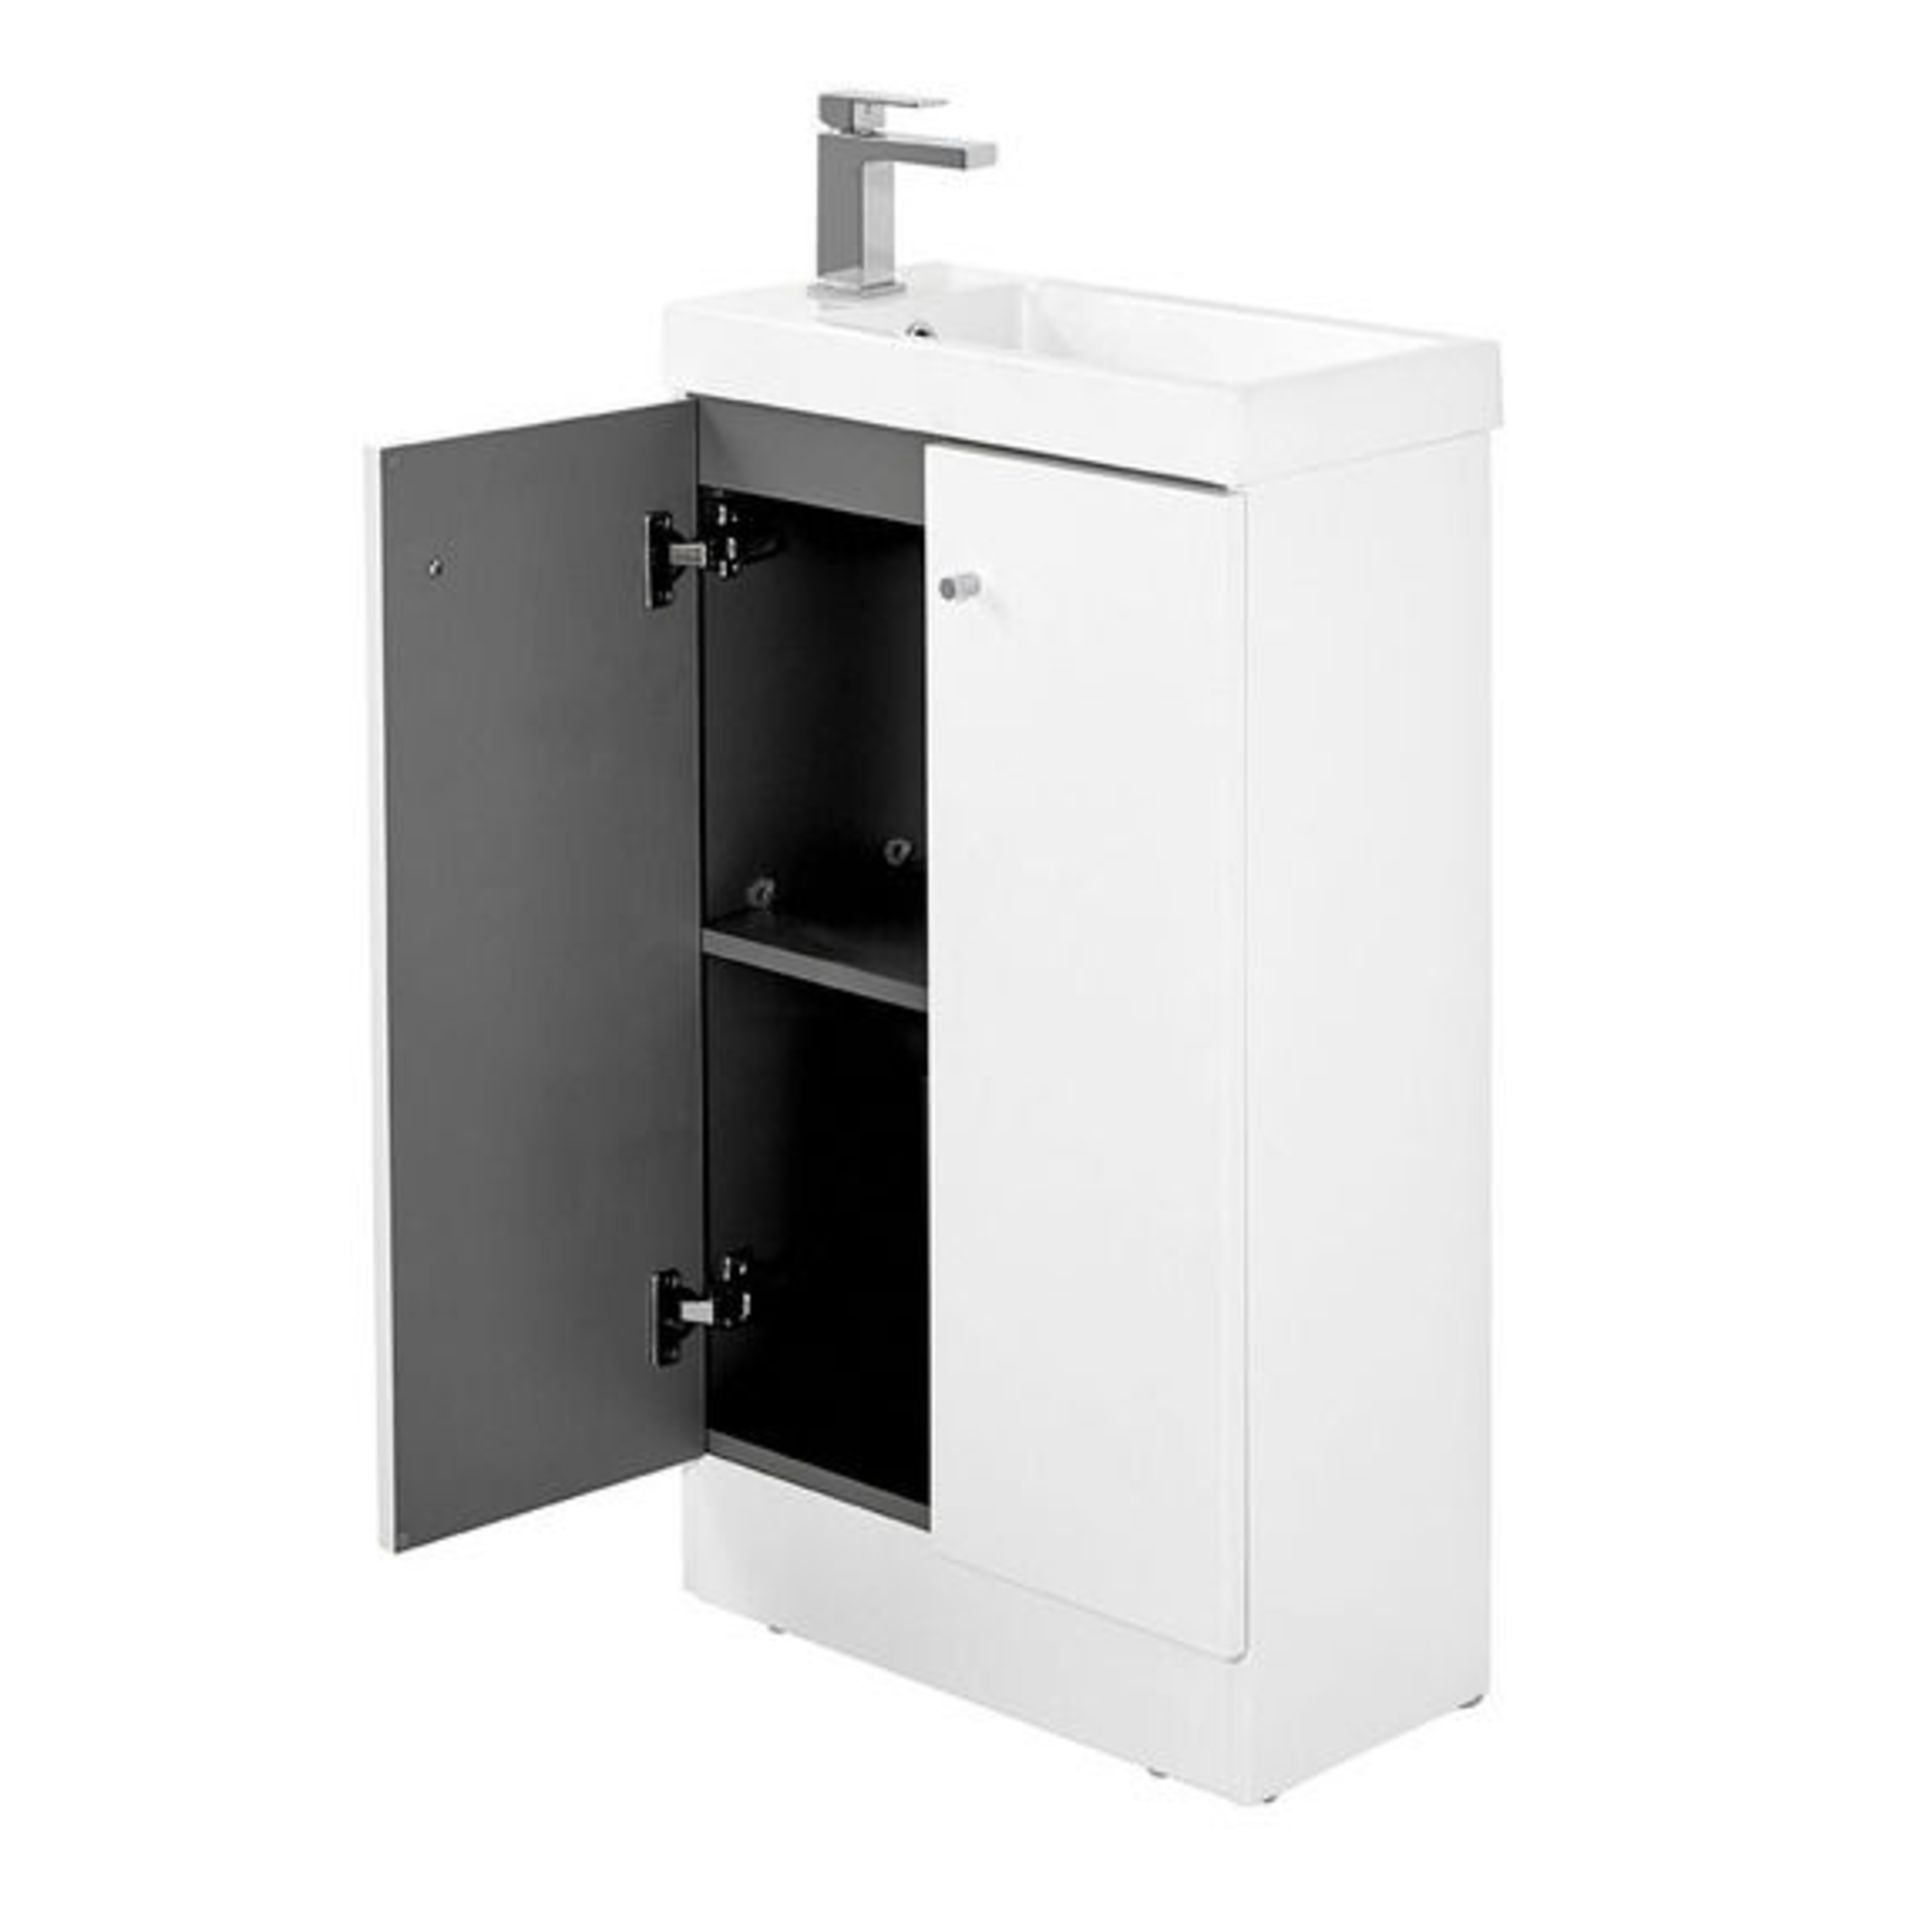 10 x Alpine Duo 495 Floor Standing Vanity Unit - Gloss White - Brand New Boxed Stock - Dimensions: - Image 2 of 5